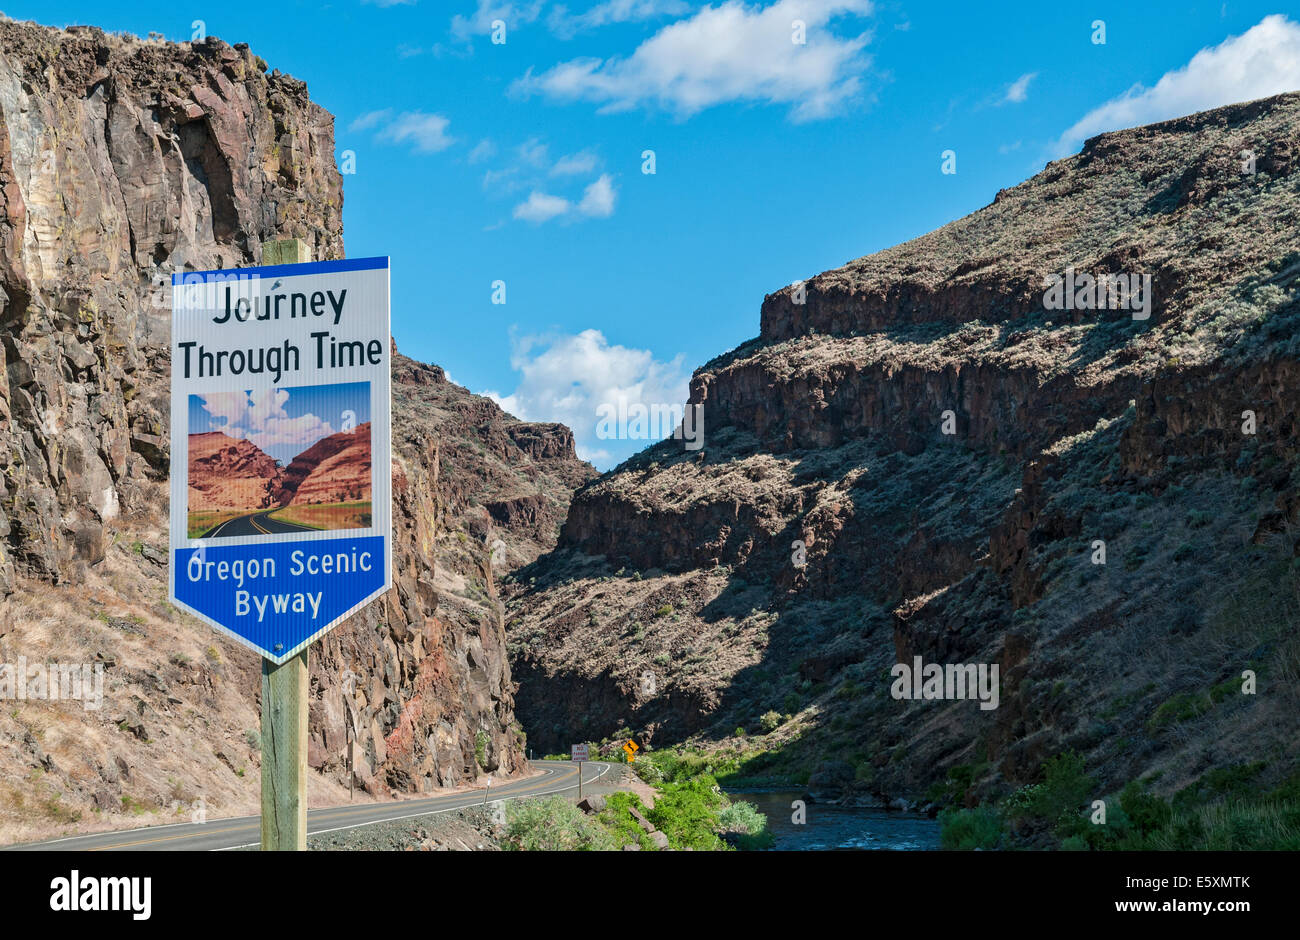 Scenic Byway Oregon, Hwy 26, in der Nähe von John Day Fossil Beds National Monument (Sheep Rock Unit) Stockfoto